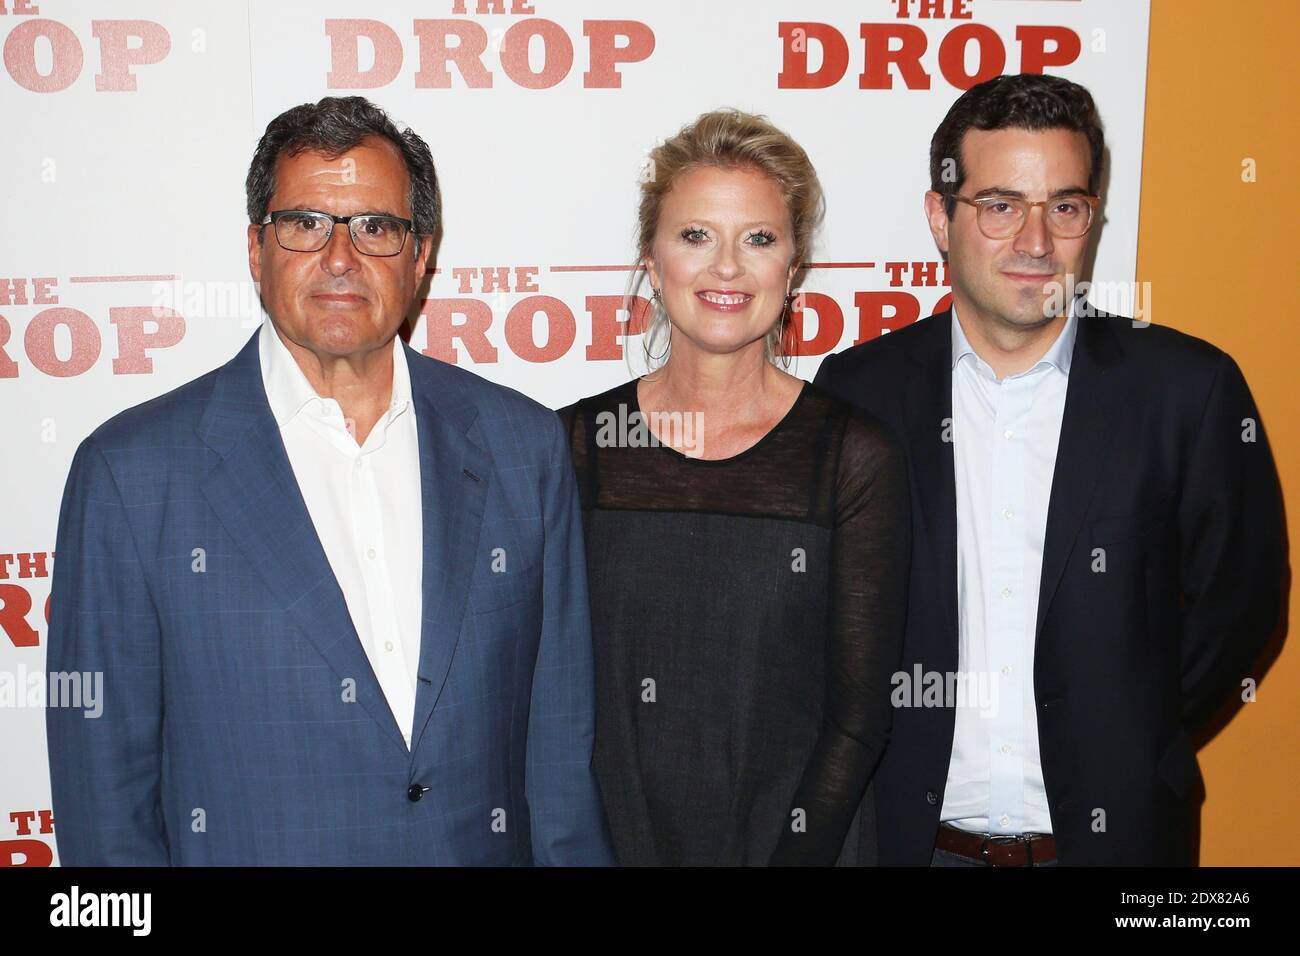 Peter Chernin, left, Jenno Topping and Mike Larocca arrive to the premiere of The Drop at The Sunshine Theater in New York City, NY, USA on September 8th, 2014. Photo by Krista Kennell/ABACAPRESS.COM Stock Photo